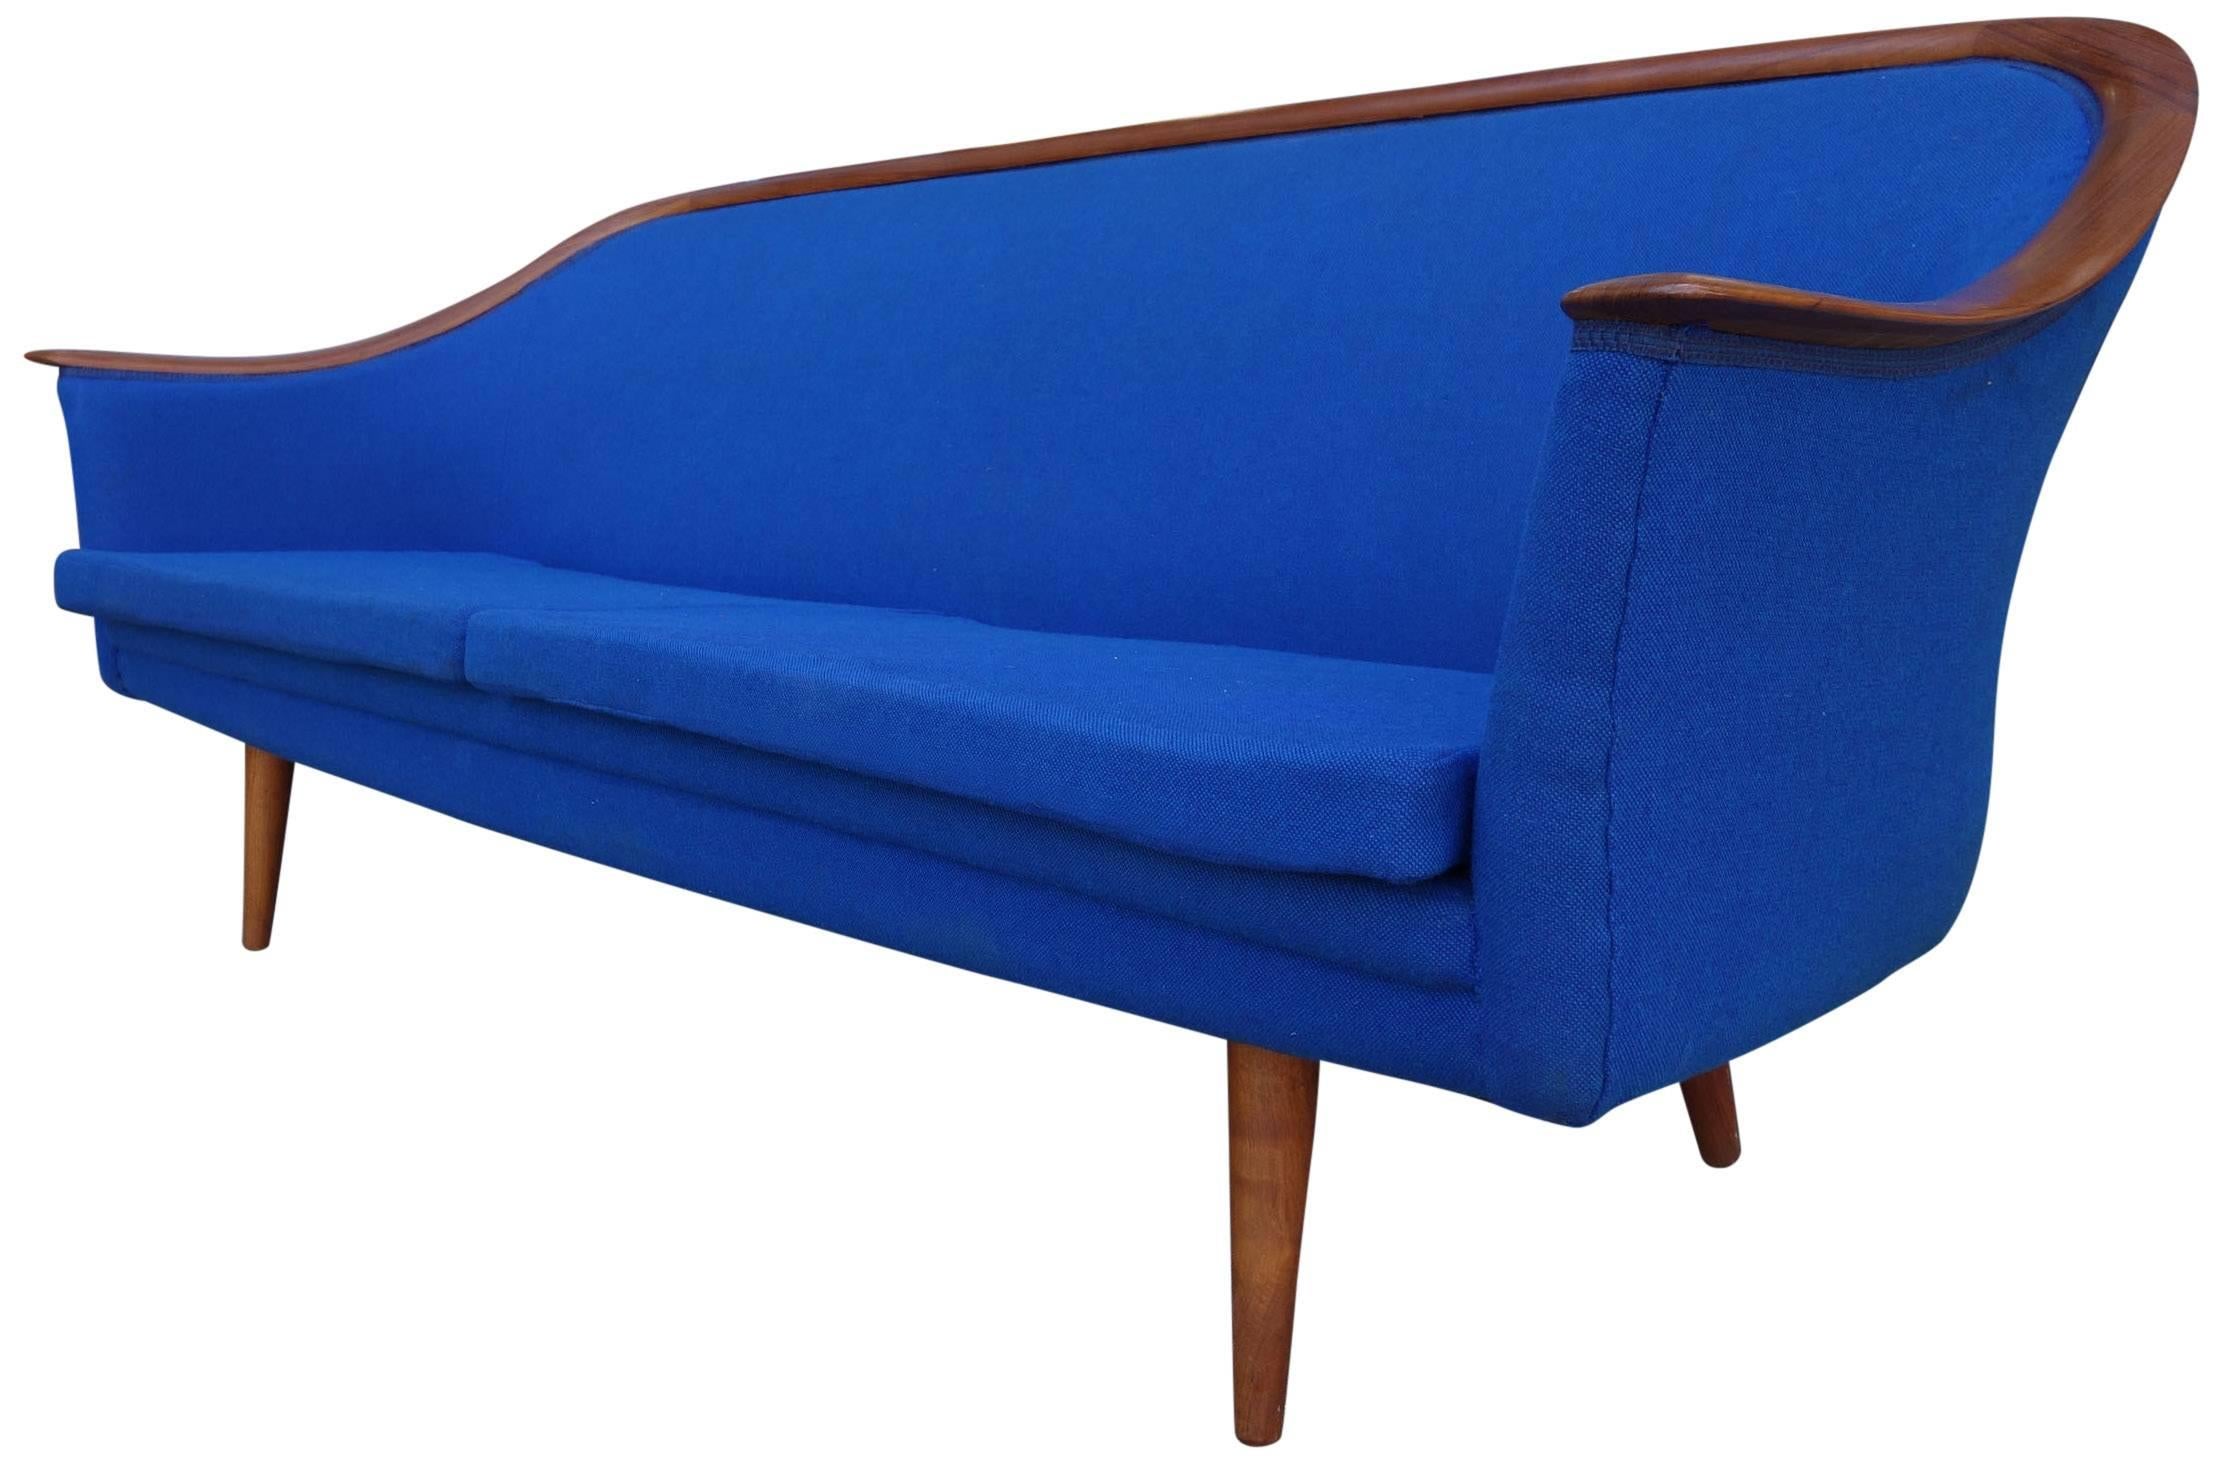 Mid-Century Scandinavian Modern sofa. Beautifully designed and masterfully constructed with teak armrest that span the length of the sofa and upholstery continues around the entire frame. Frederik Kayser was heavily influenced by Danish design